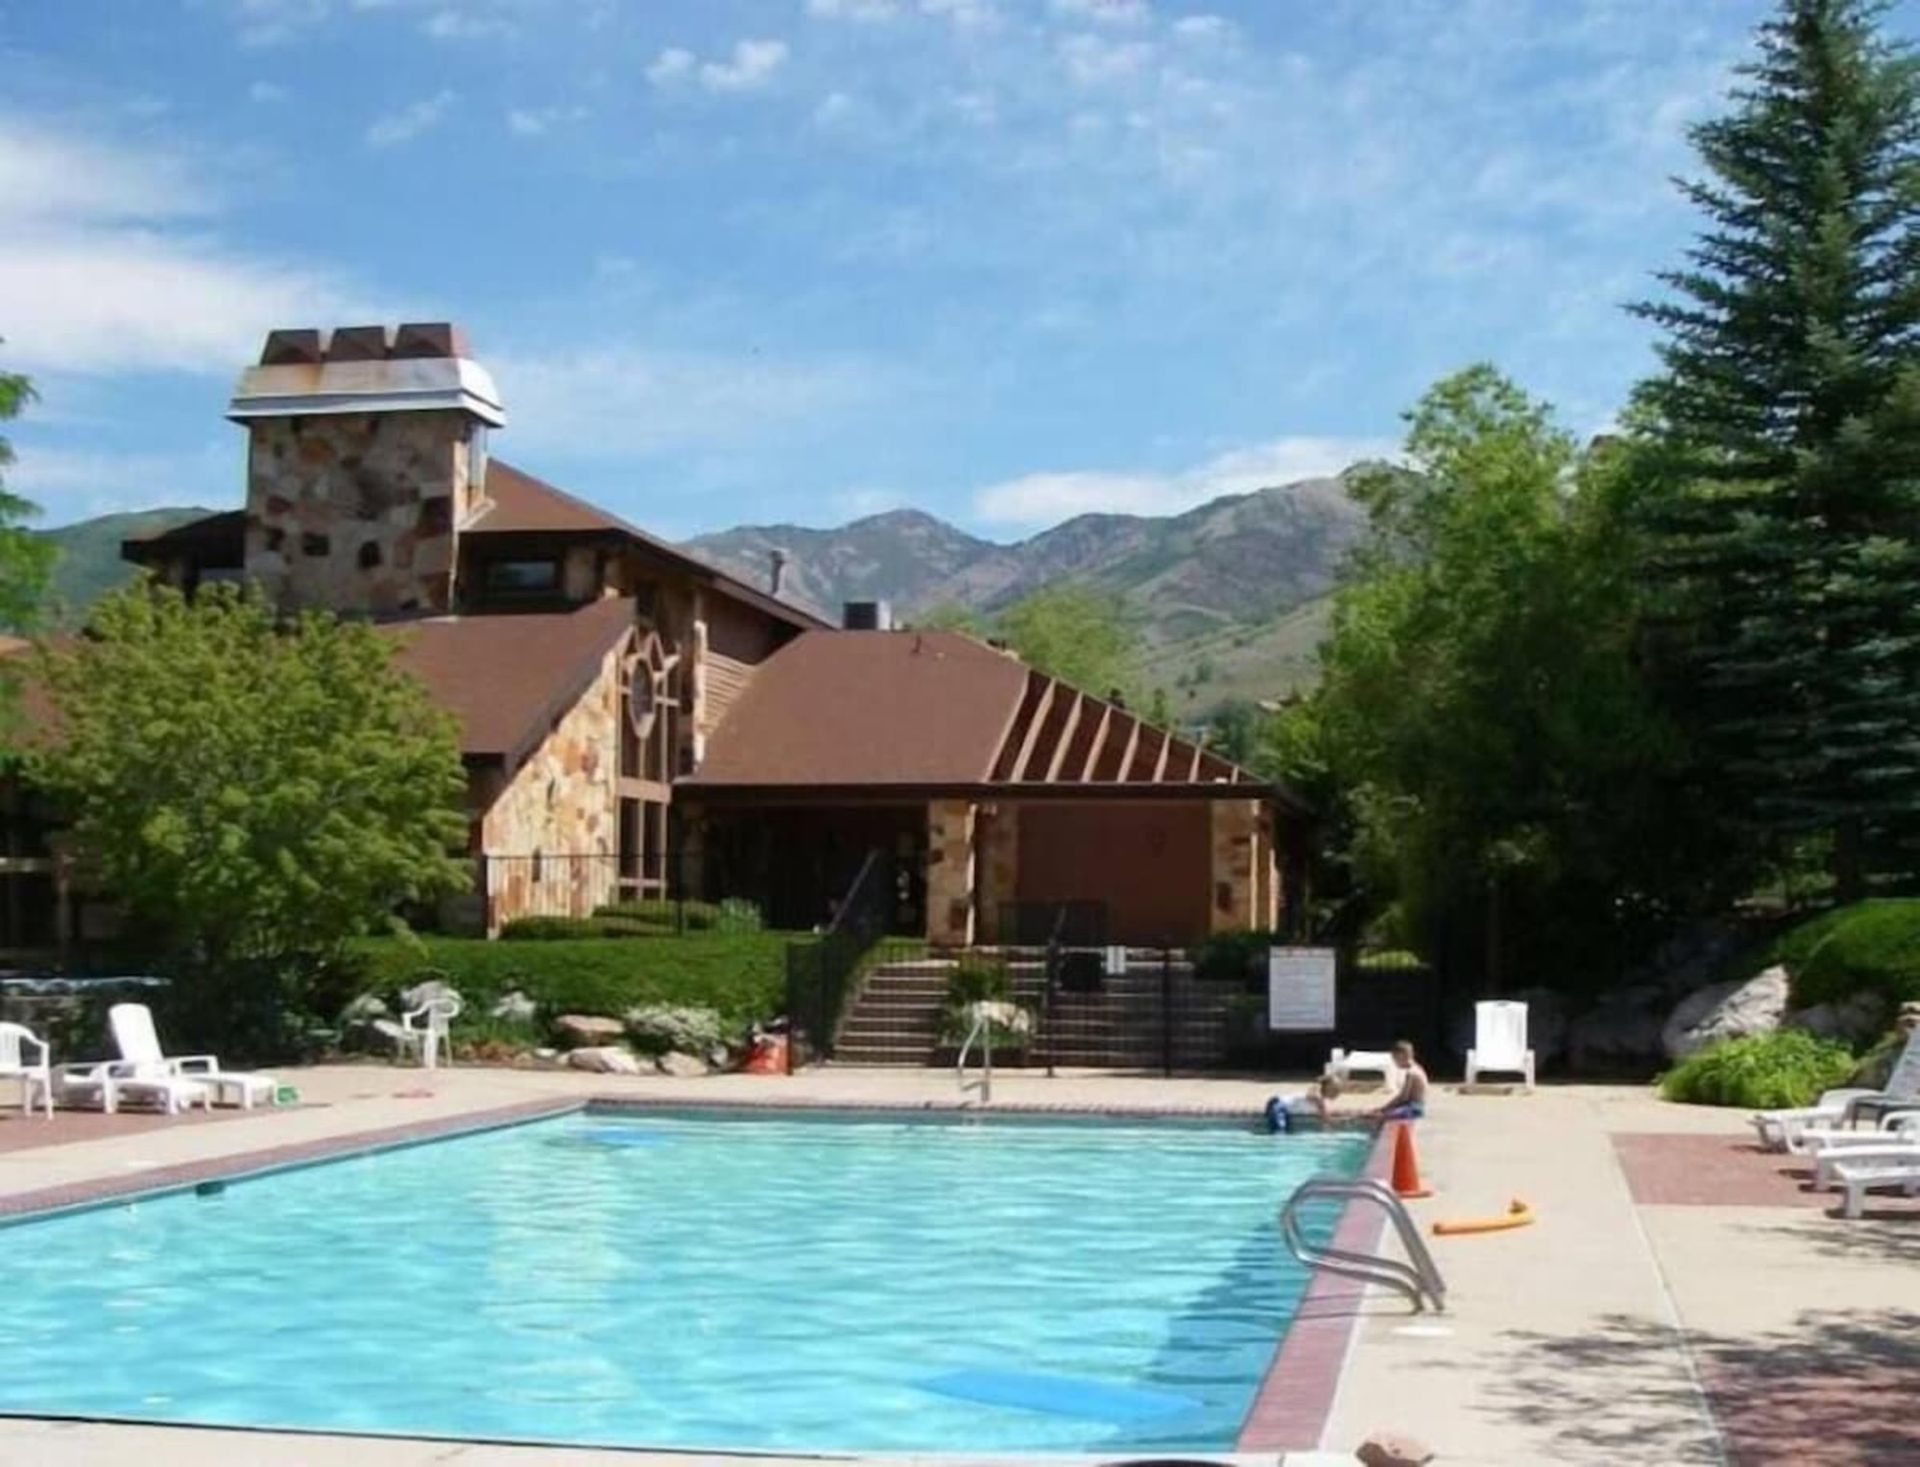 The Roam Community swimming pool and Clubhouse with mountains in the background